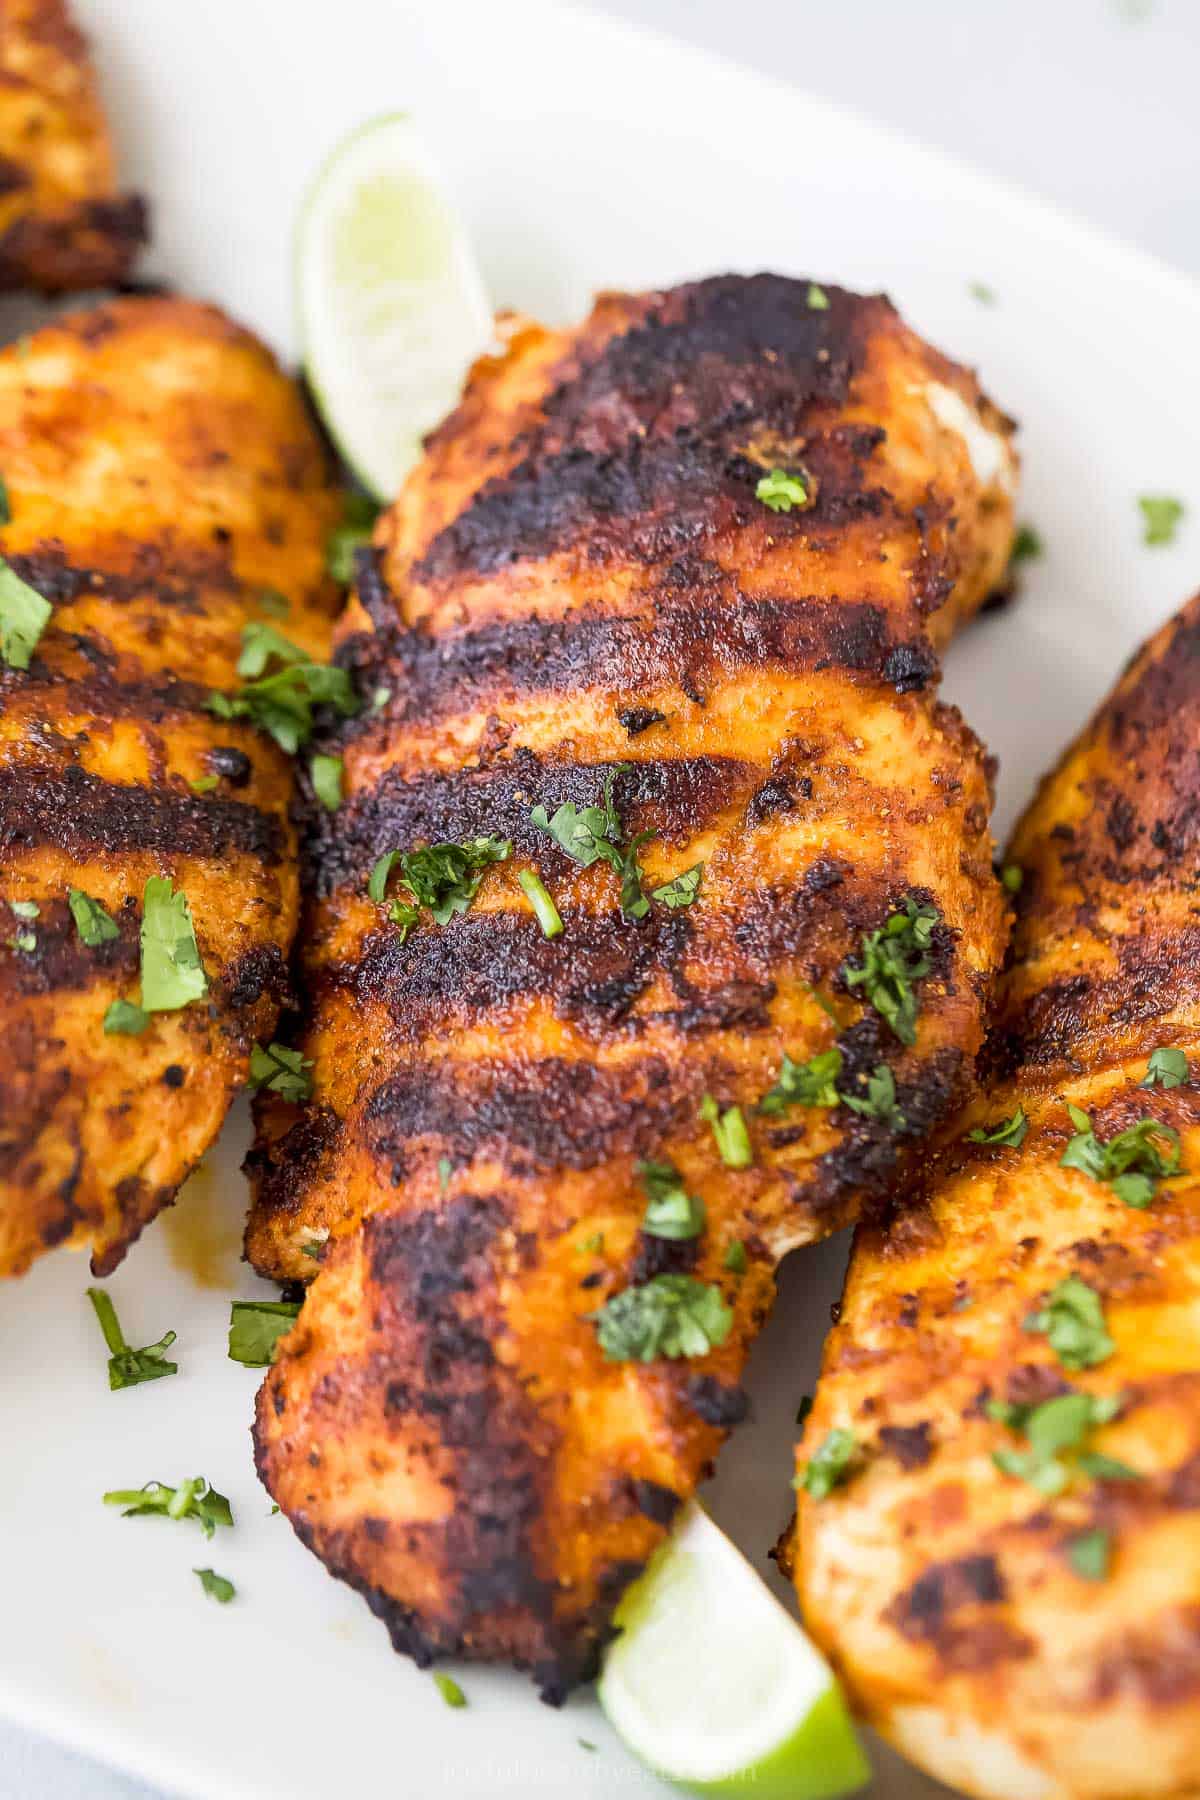 A close-up shot of a grilled chicken breast on a platter with three other breasts